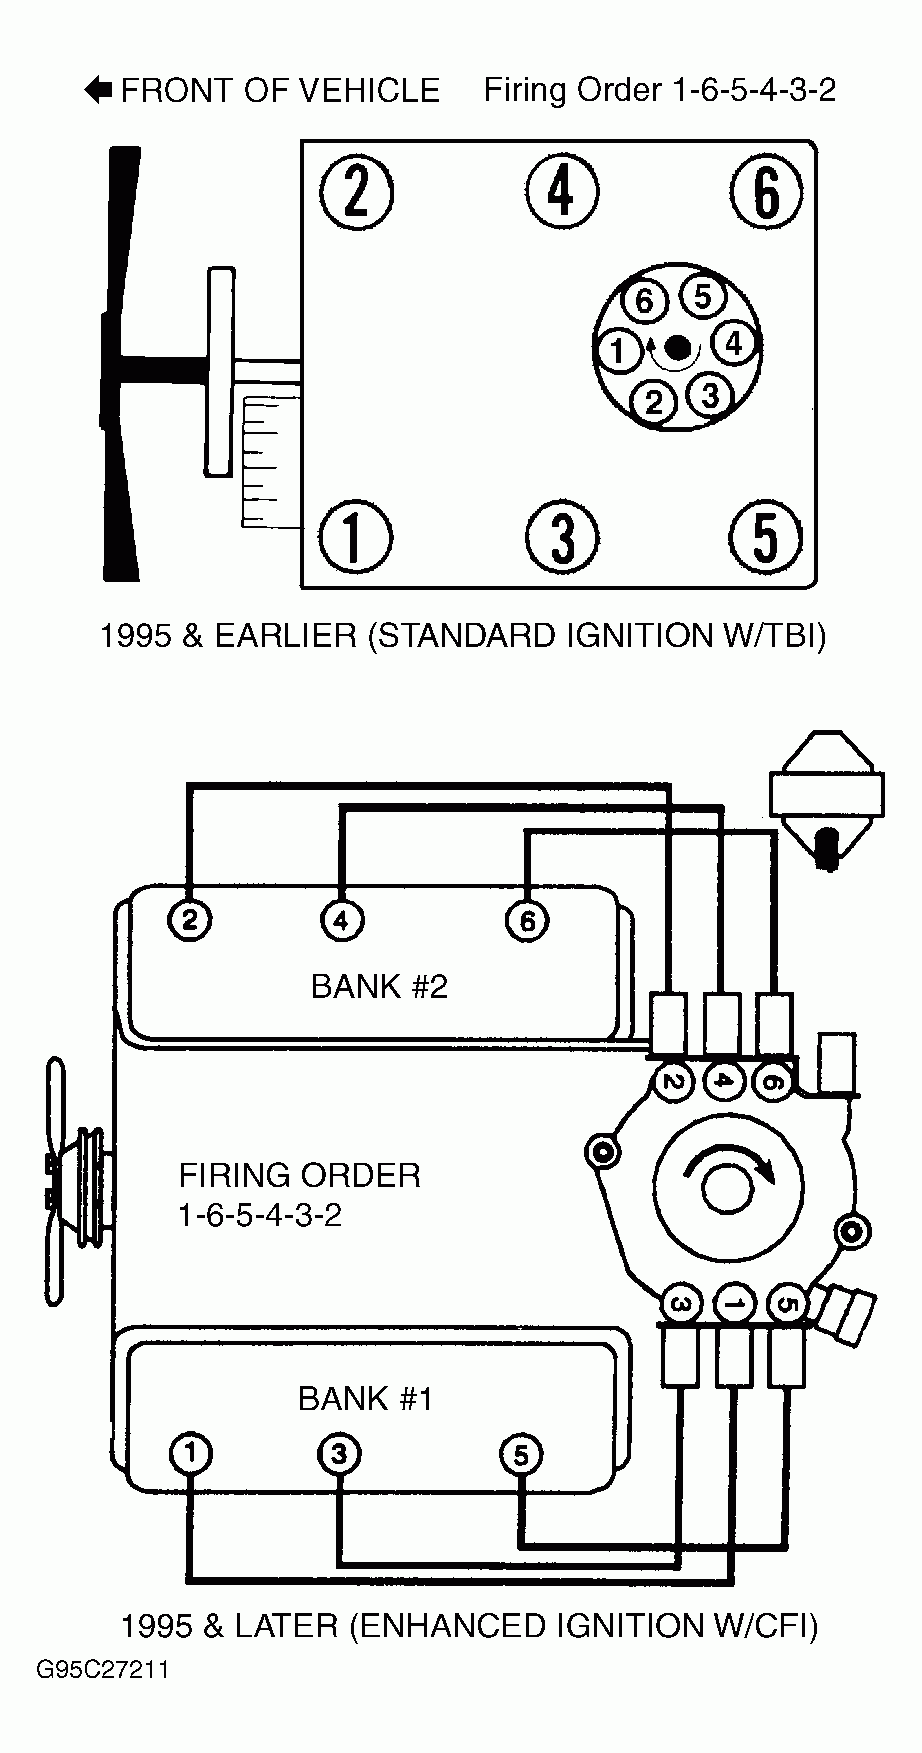 What Is The Firing Order For Spark Plug Wires On 1995 S 10 Chevy Blazer